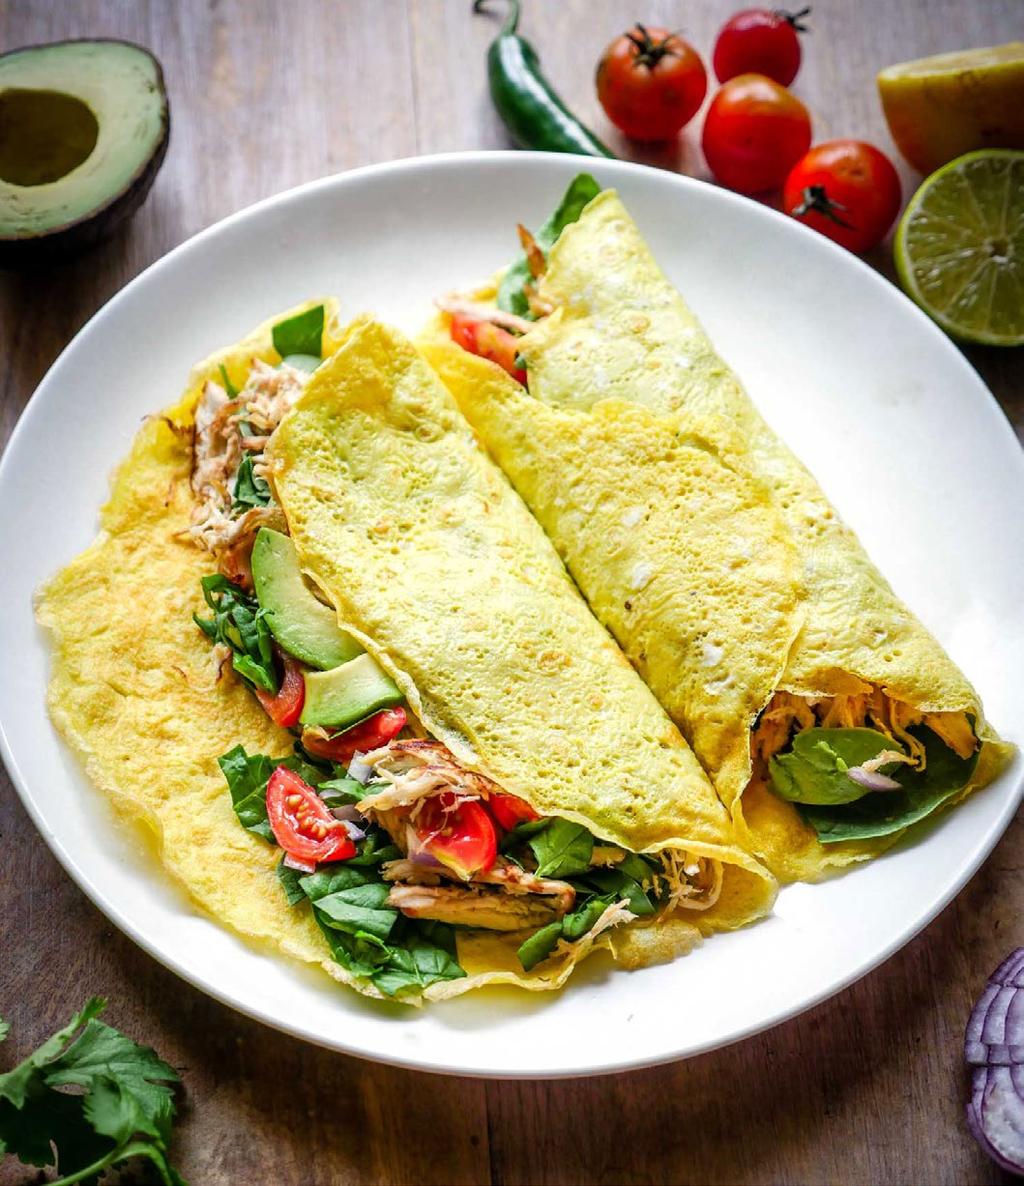 Citrus Chicken Egg Wraps Directions: Shredded rotisserie chicken breast is marinated in lemon and lime juice, crisped in coconut oil and then used to fill an egg wrap to make a tasty meal that works